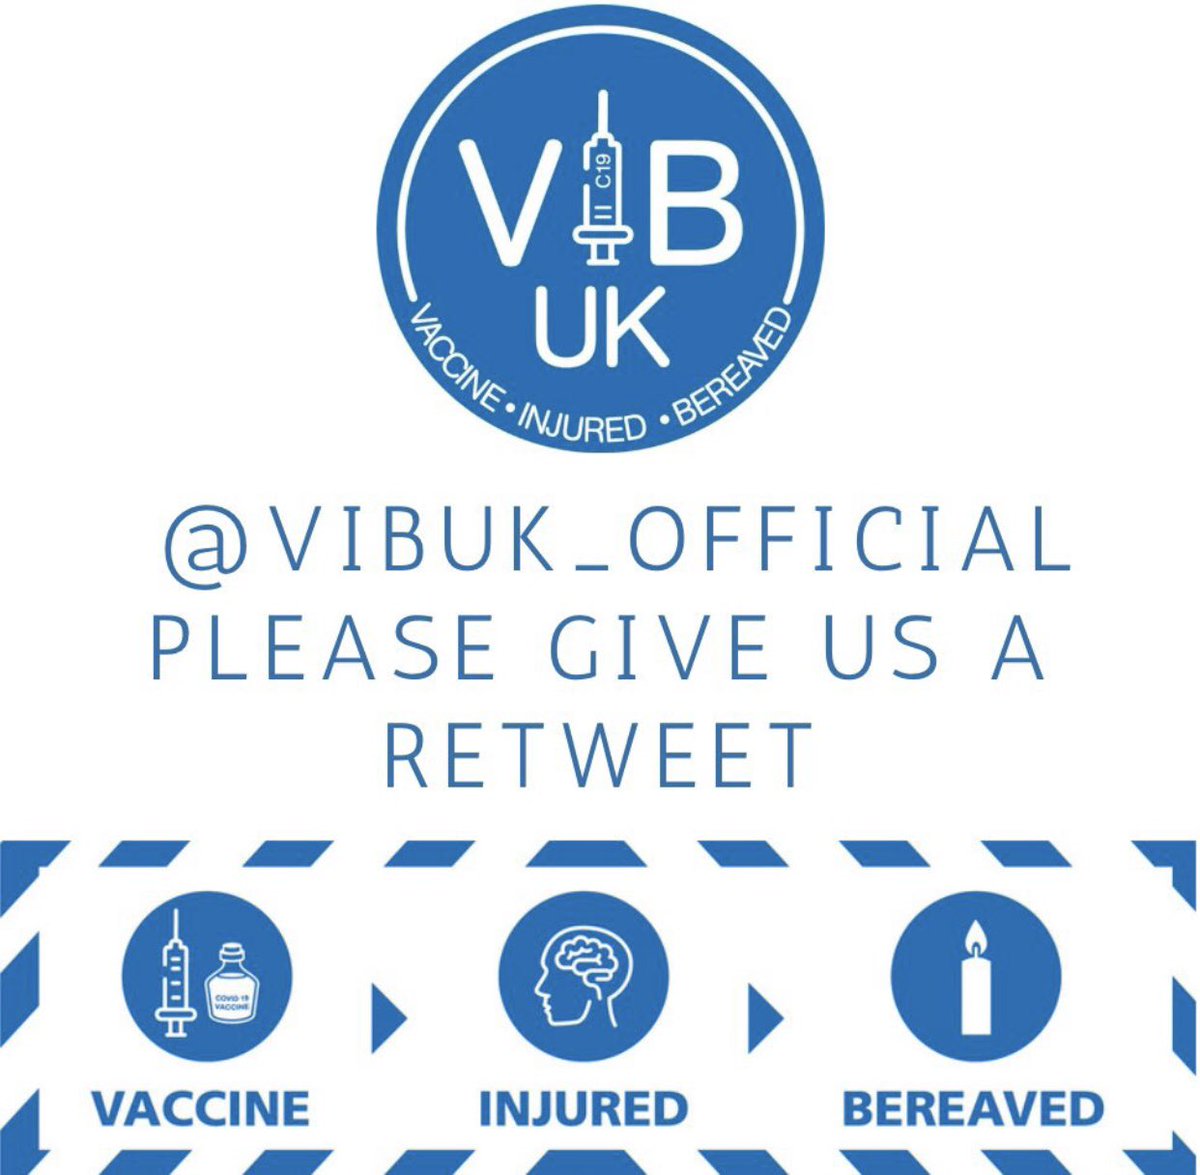 Please spread the word @VIBUK_Official is the new X account for our campaign for VDPS reform. Please help us to rebuild our followers and support us in our battle for justice. @SueC00K @Beck_Sall @thecoastguy @benleo444 @MichelleDewbs @IsabelOakeshott 🙏🏻💙